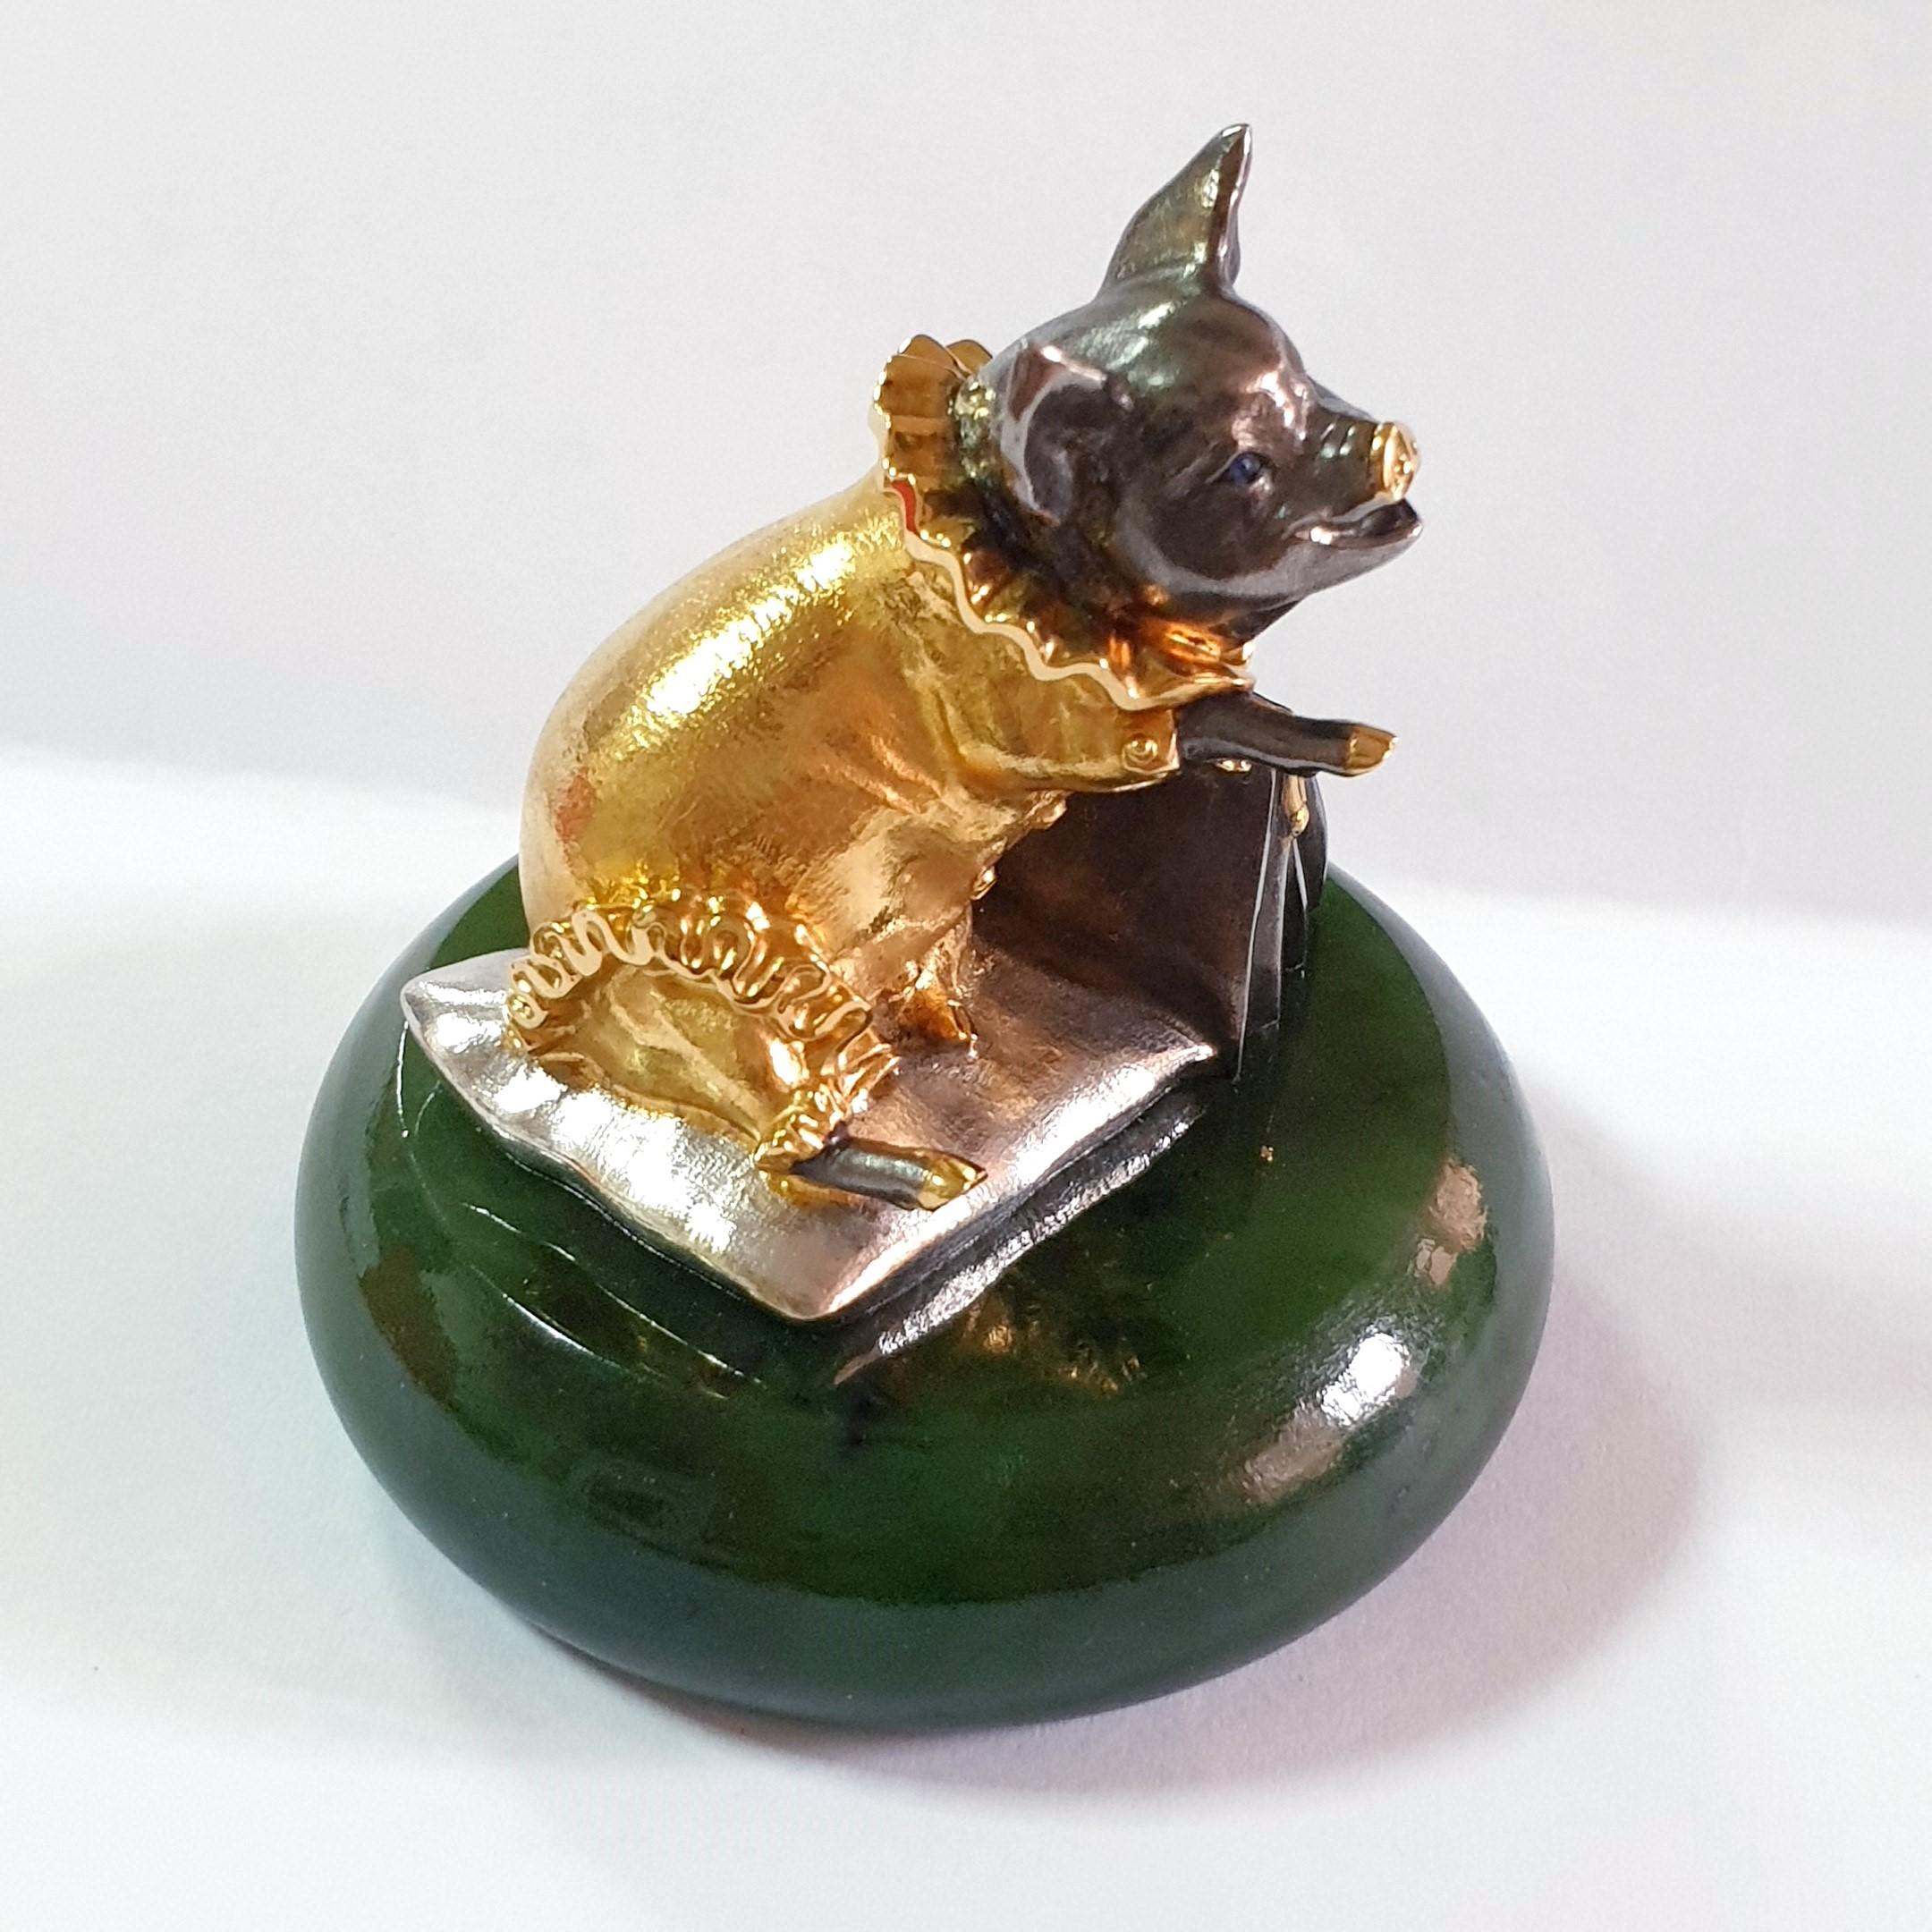 A pig, a symbol of fertility and abundance, was made into a silver miniature with a creative idea and masterful craftsmanship. A genuine silver with gold plated pig has lively facial features with sapphire eyes. A nicely dressed pig sitting on a